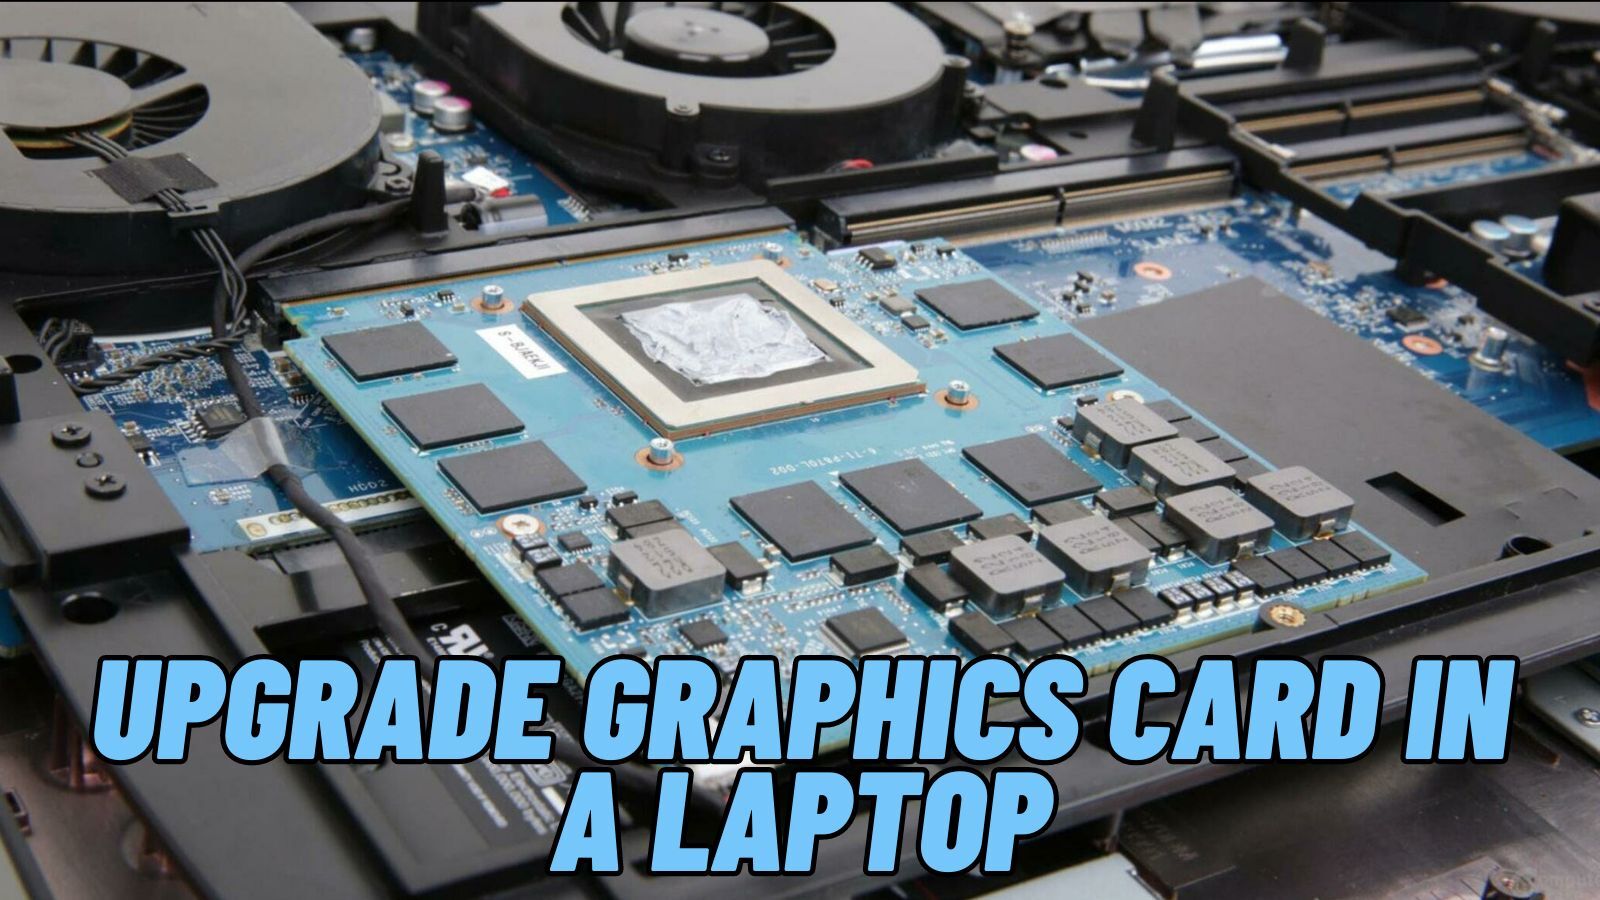 Can You Upgrade Graphics Card in a Laptop (GPU)?